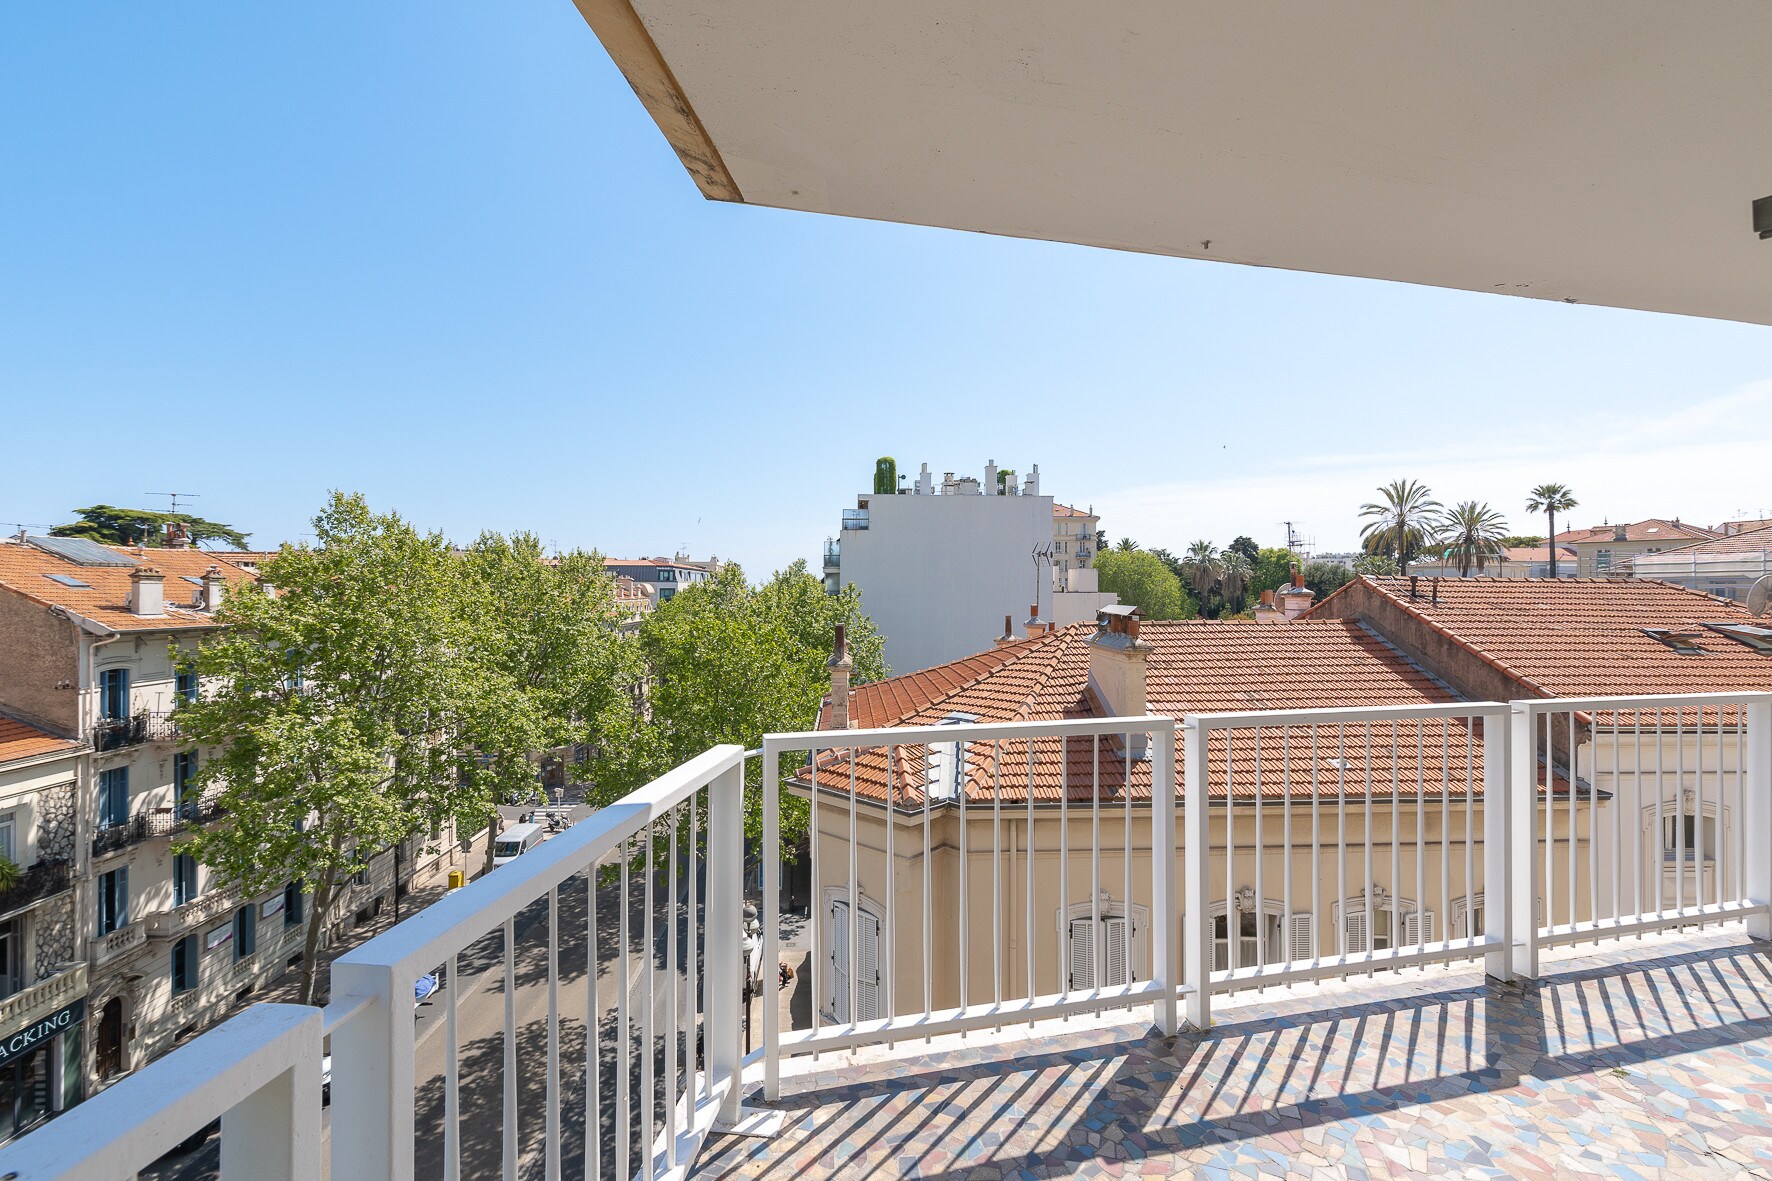 Property Image 2 - Newly renovated apartment in Cannes within walking distance of the Palais des Festivals